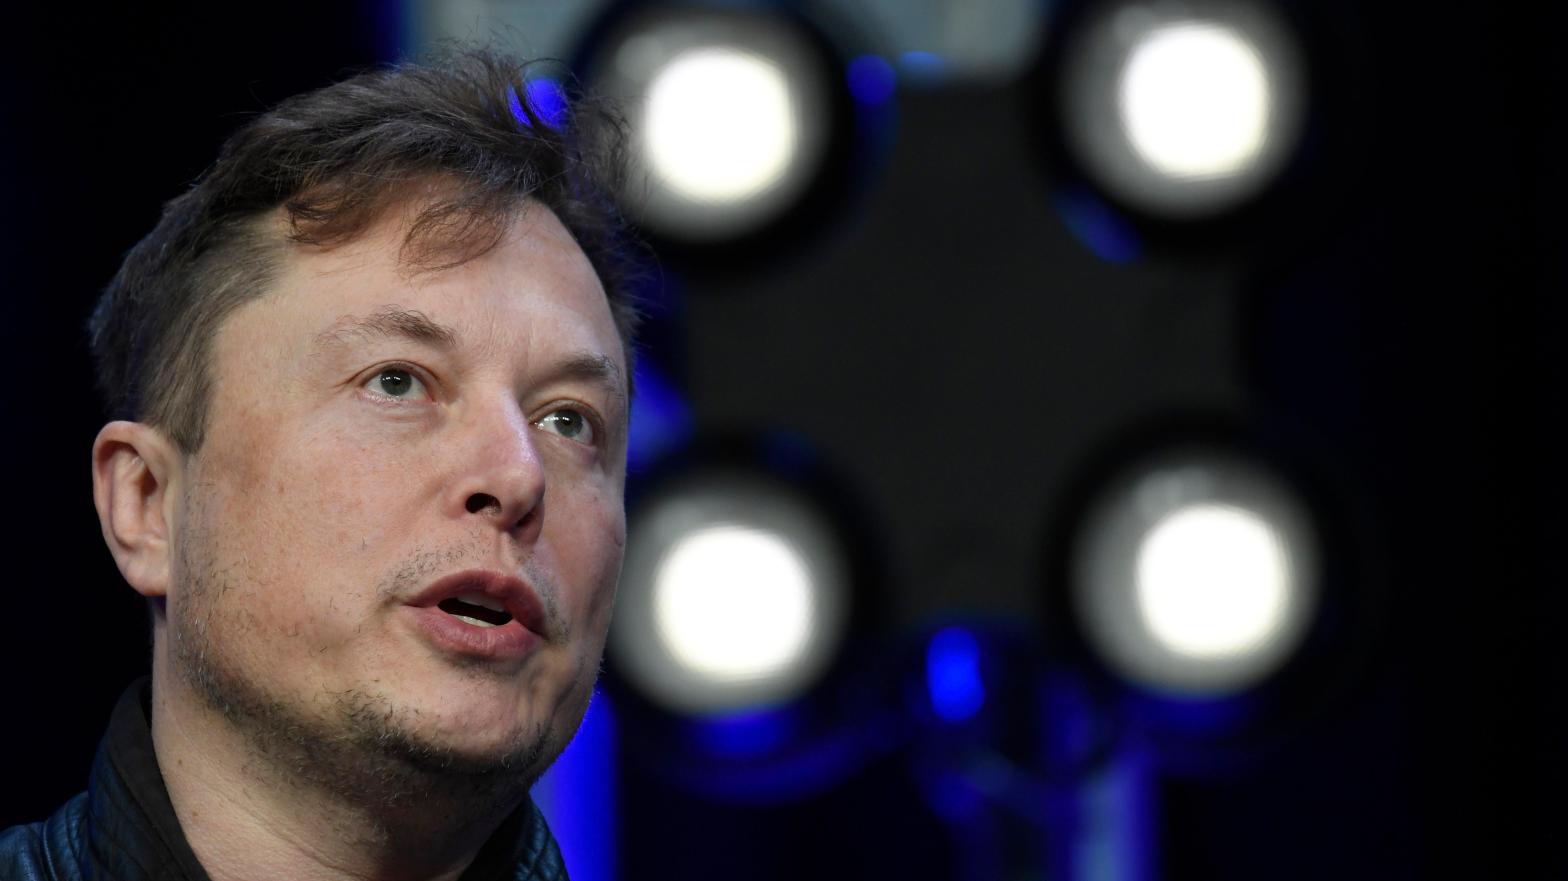 Elon Musk's company is facing at least 10 lawsuits alleging discrimination at the workplace.  (Photo: Susan Walsh, AP)